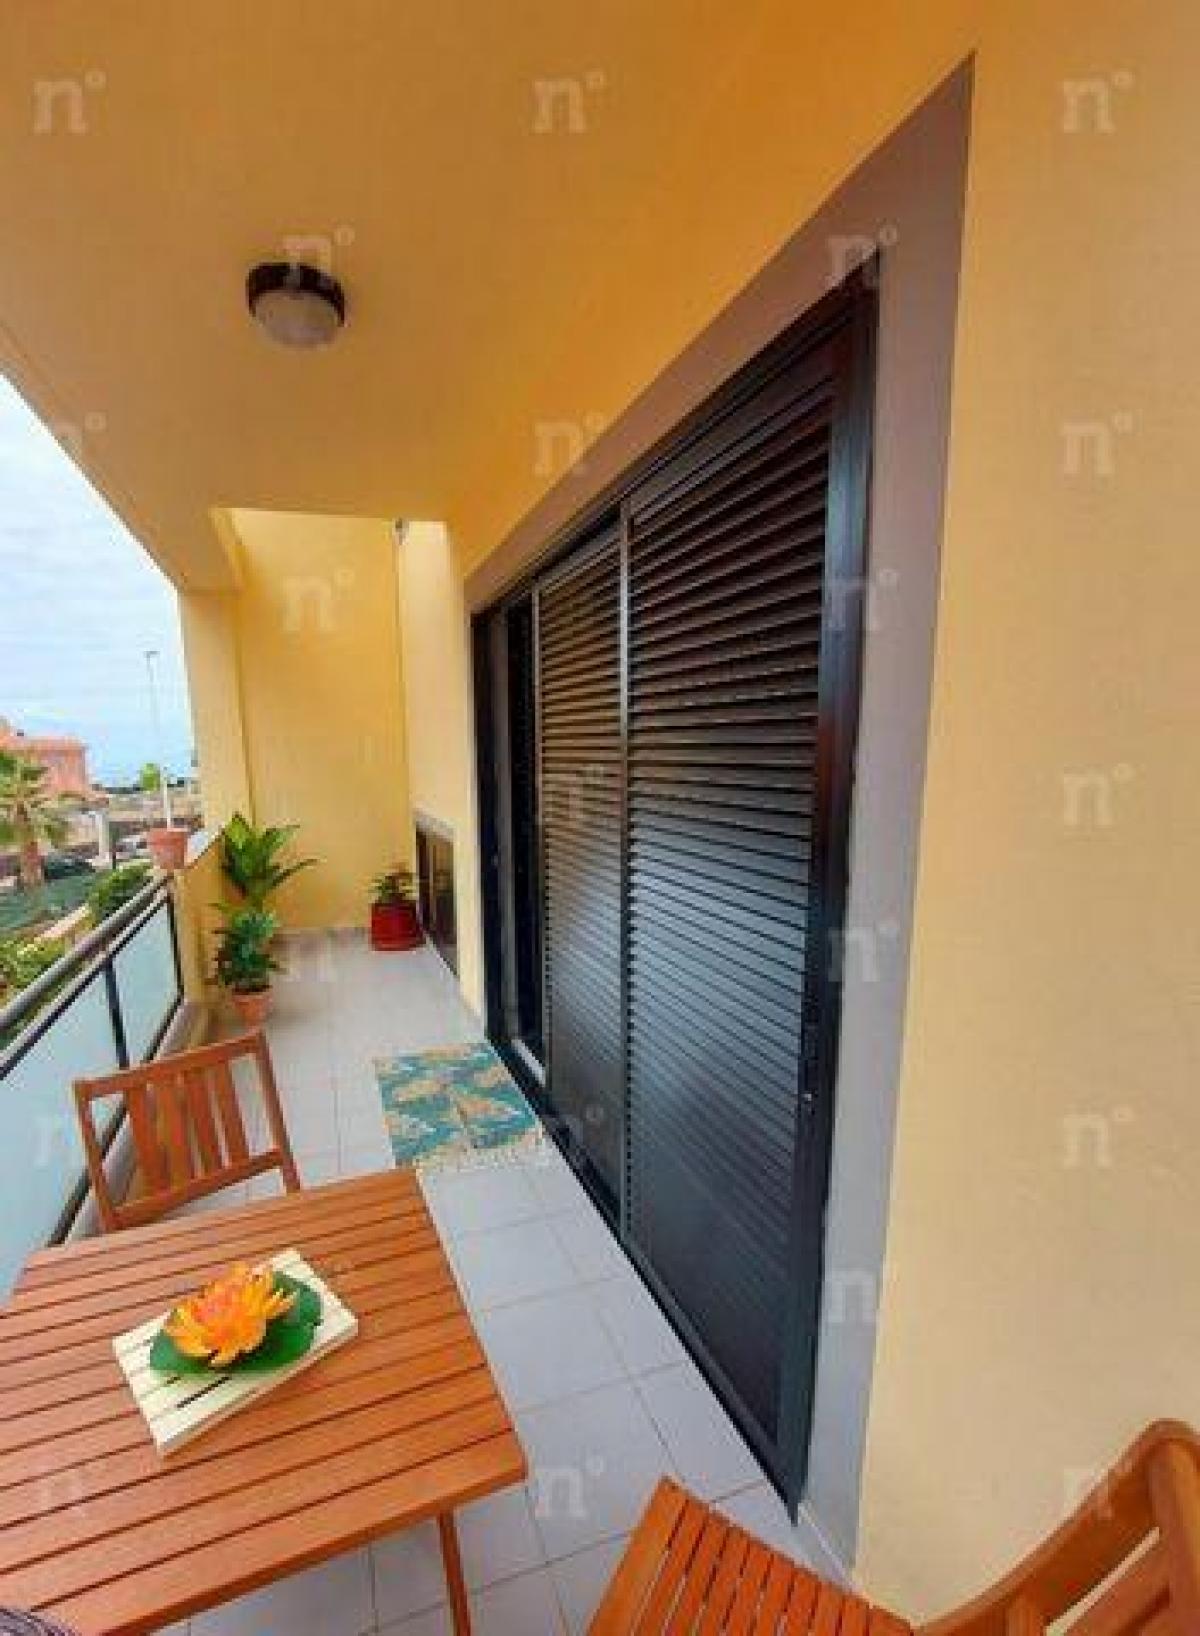 Picture of Multi-Family Home For Sale in Tenerife, Tenerife, Spain